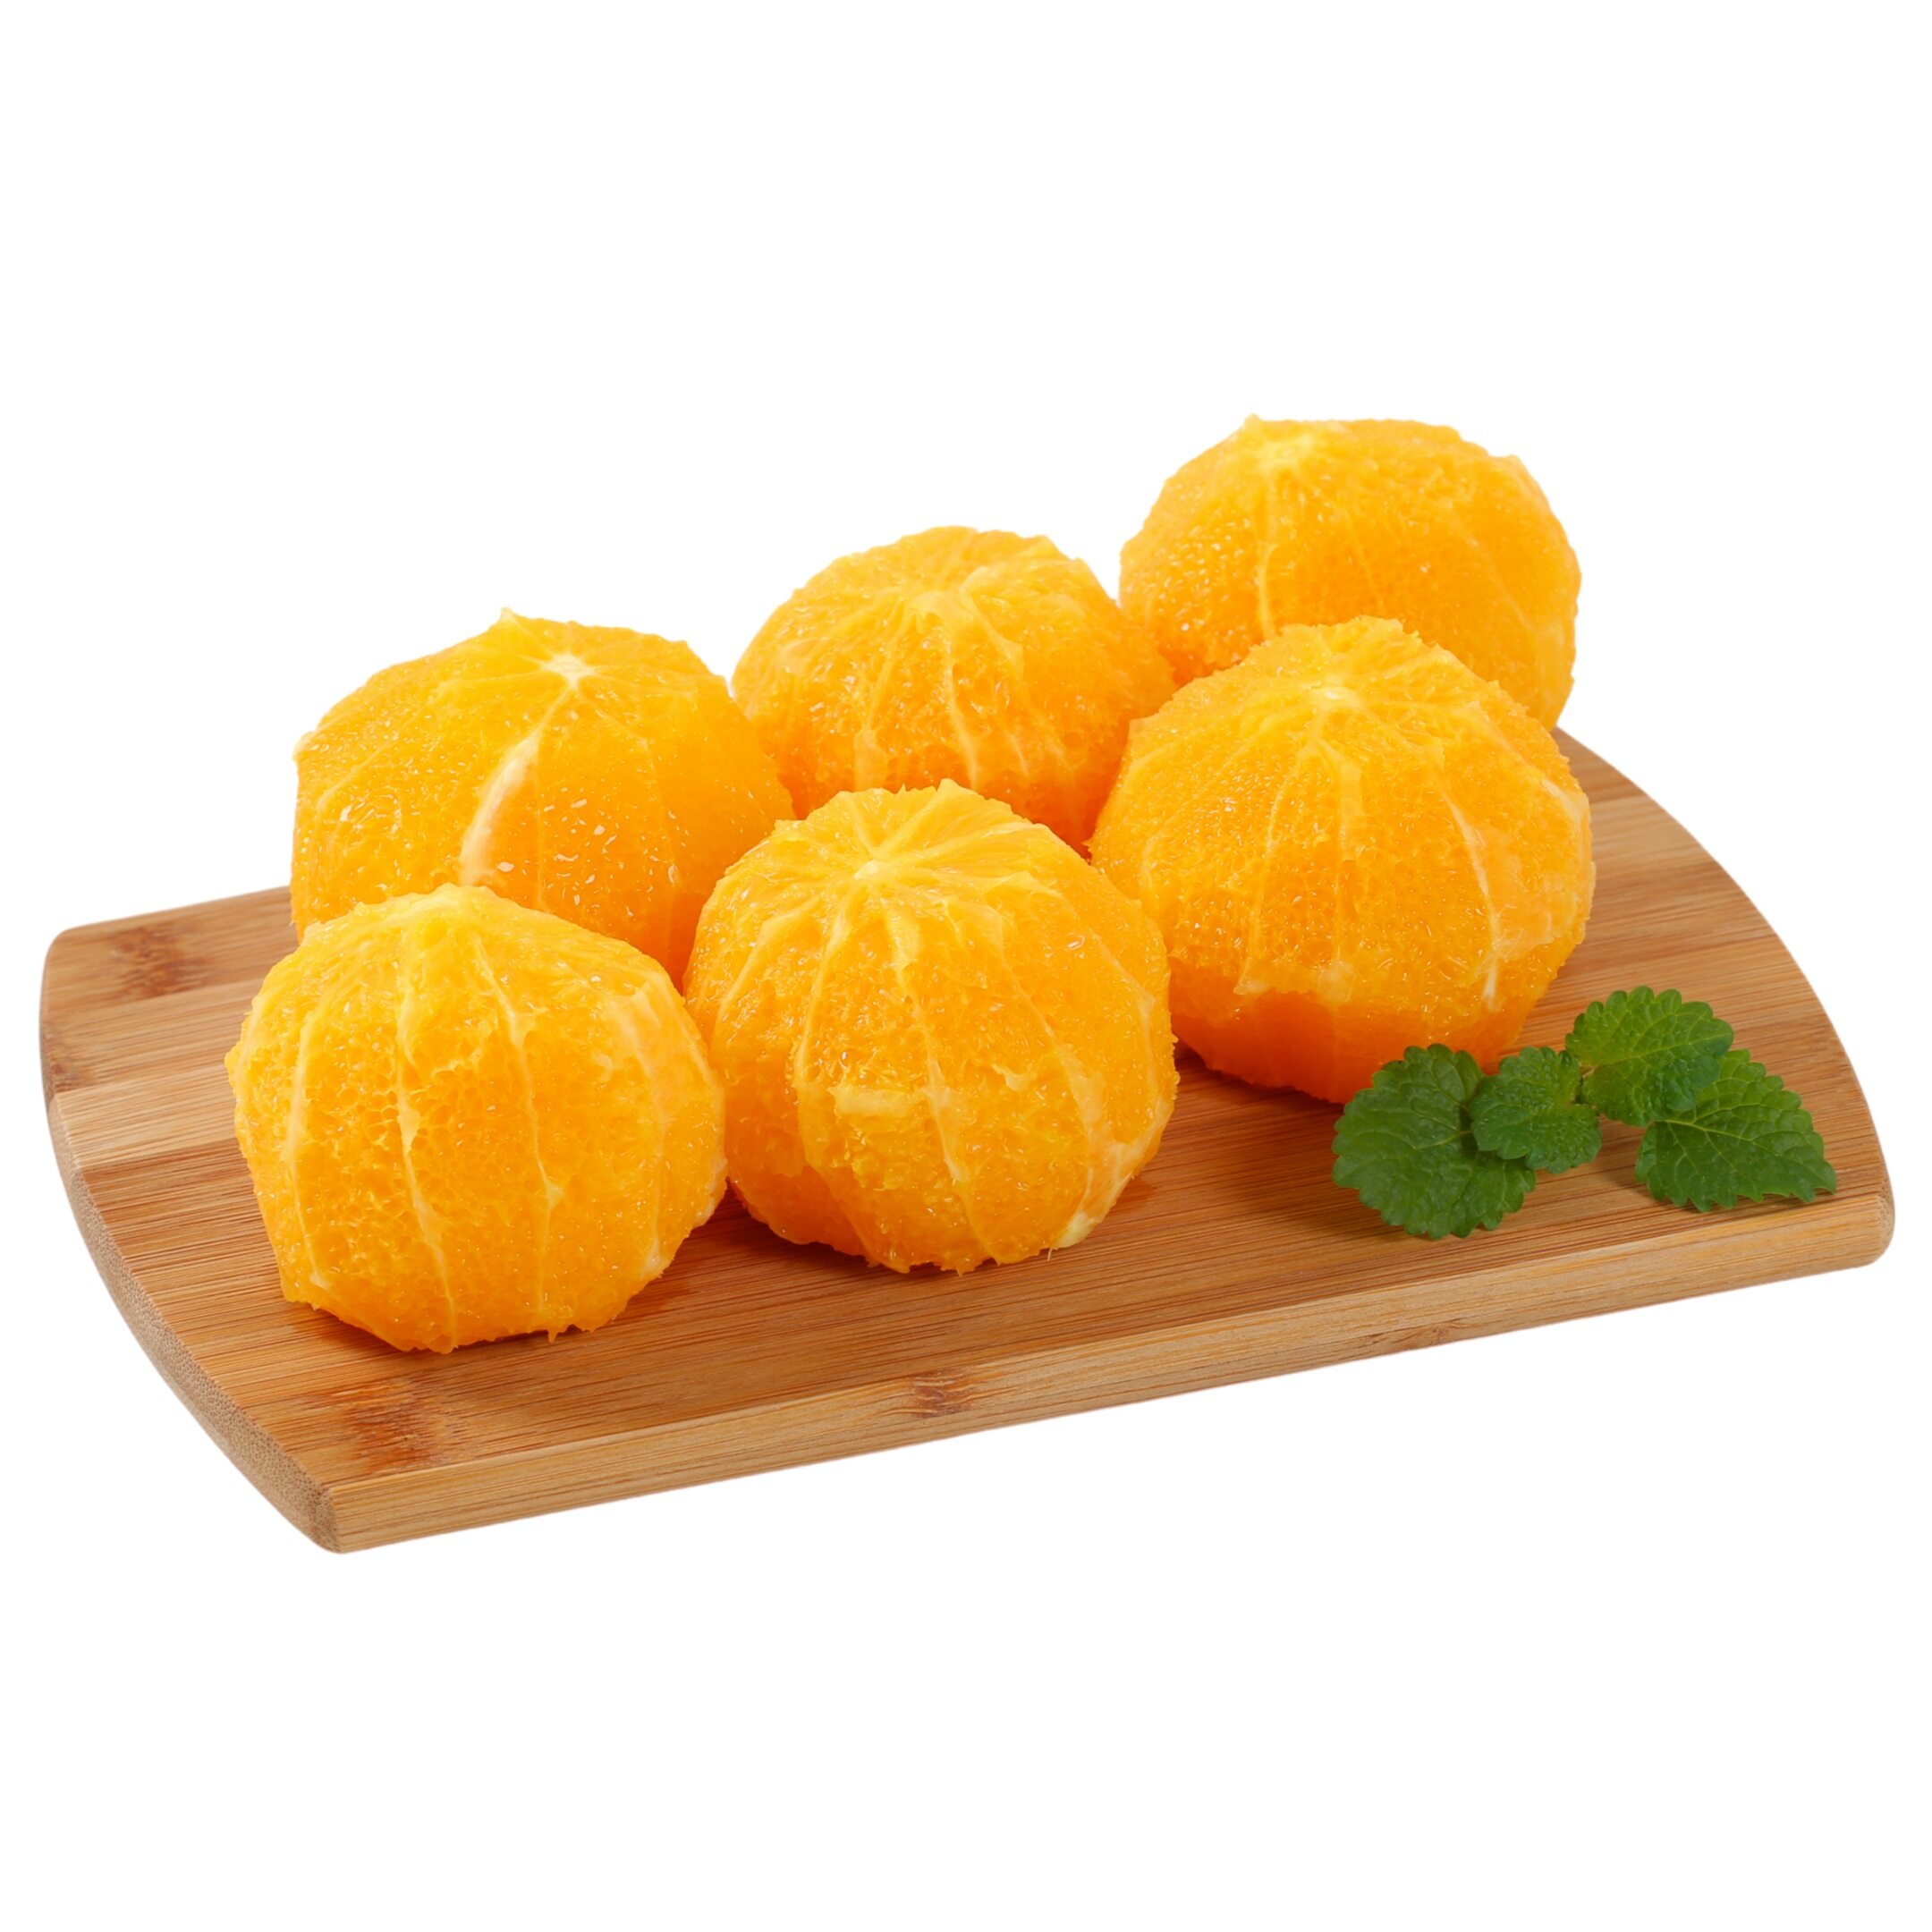 How To Store Peeled Oranges